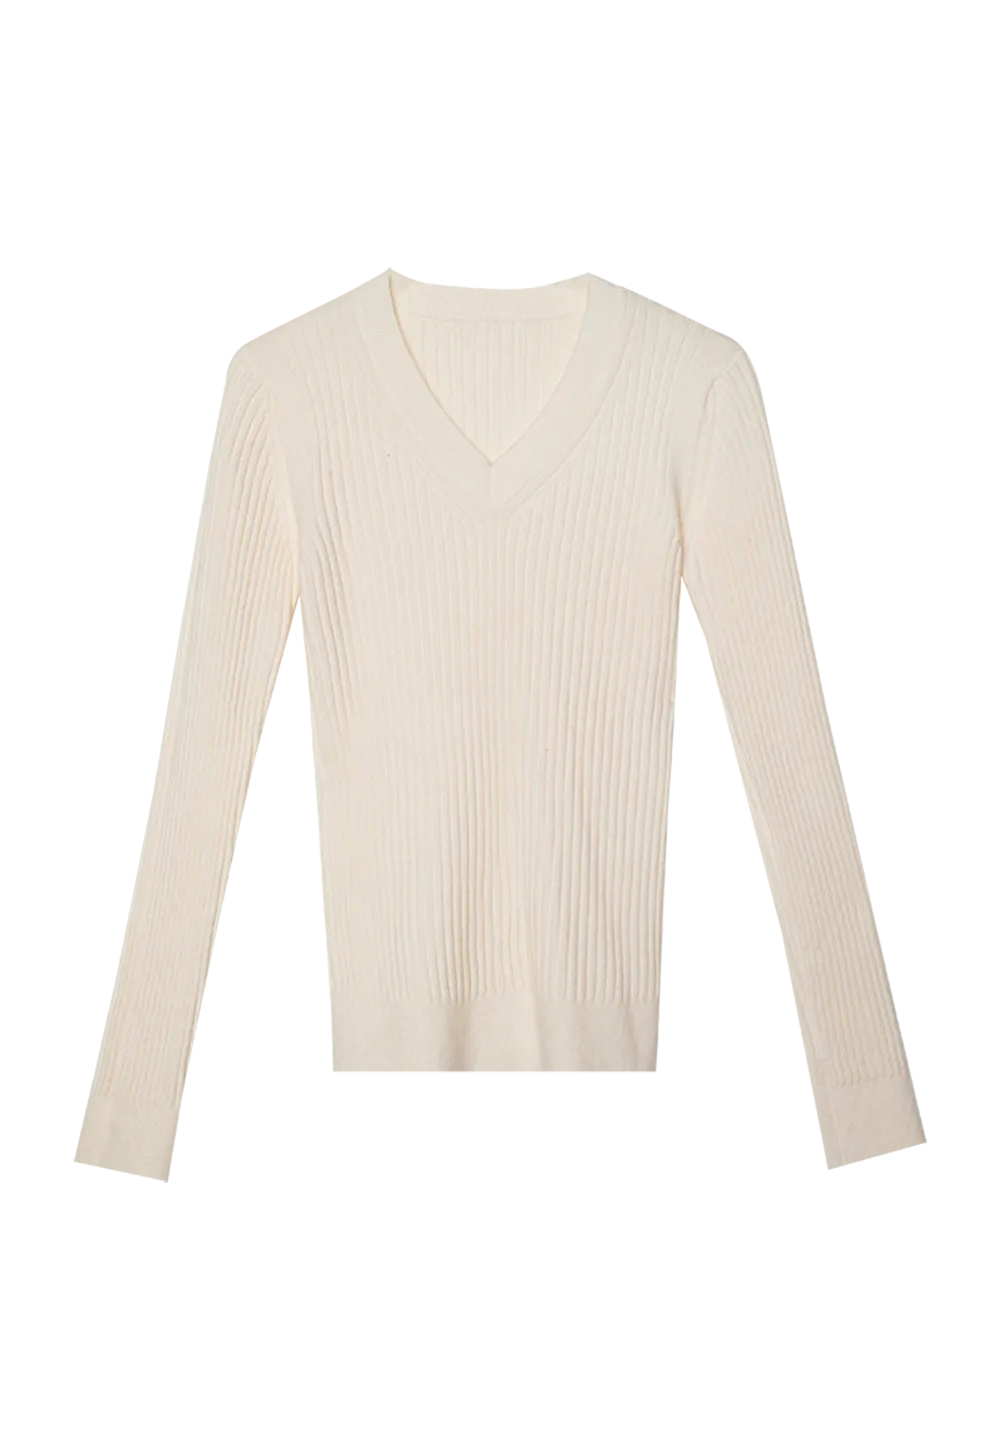 Women's V-Neck Ribbed Knit Sweater - Long Sleeve Pullover